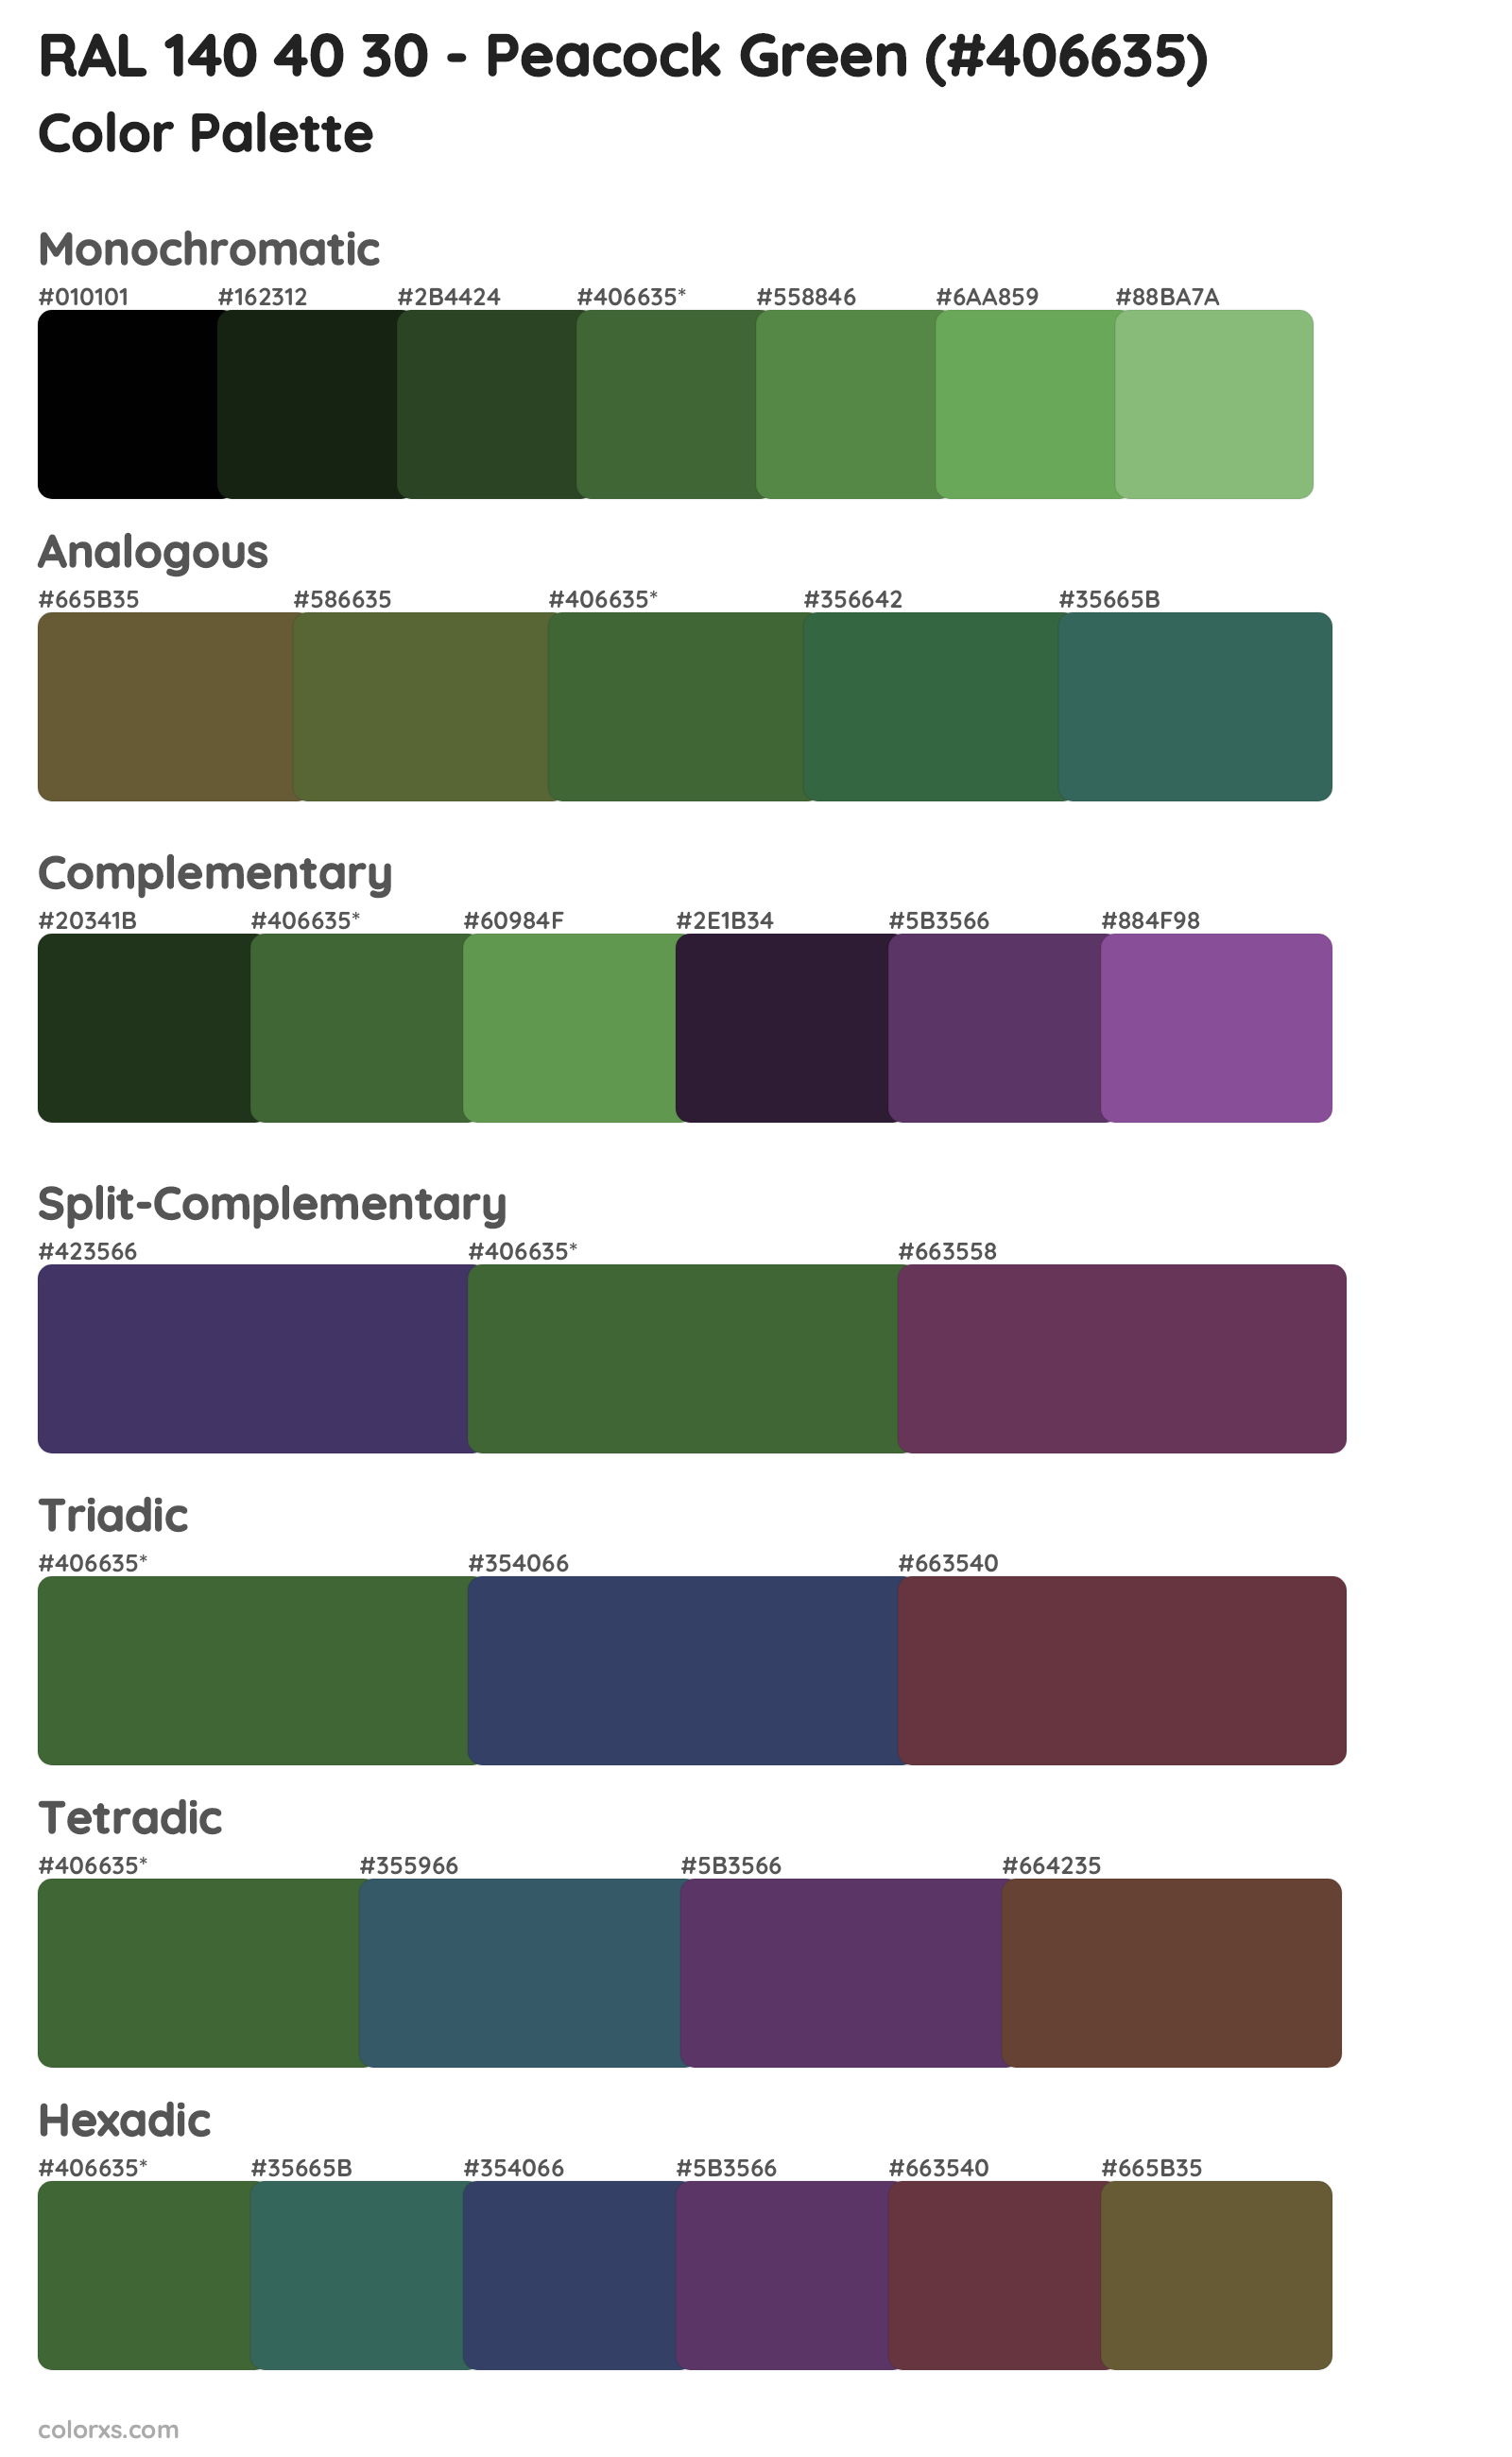 RAL 140 40 30 - Peacock Green Color Scheme Palettes